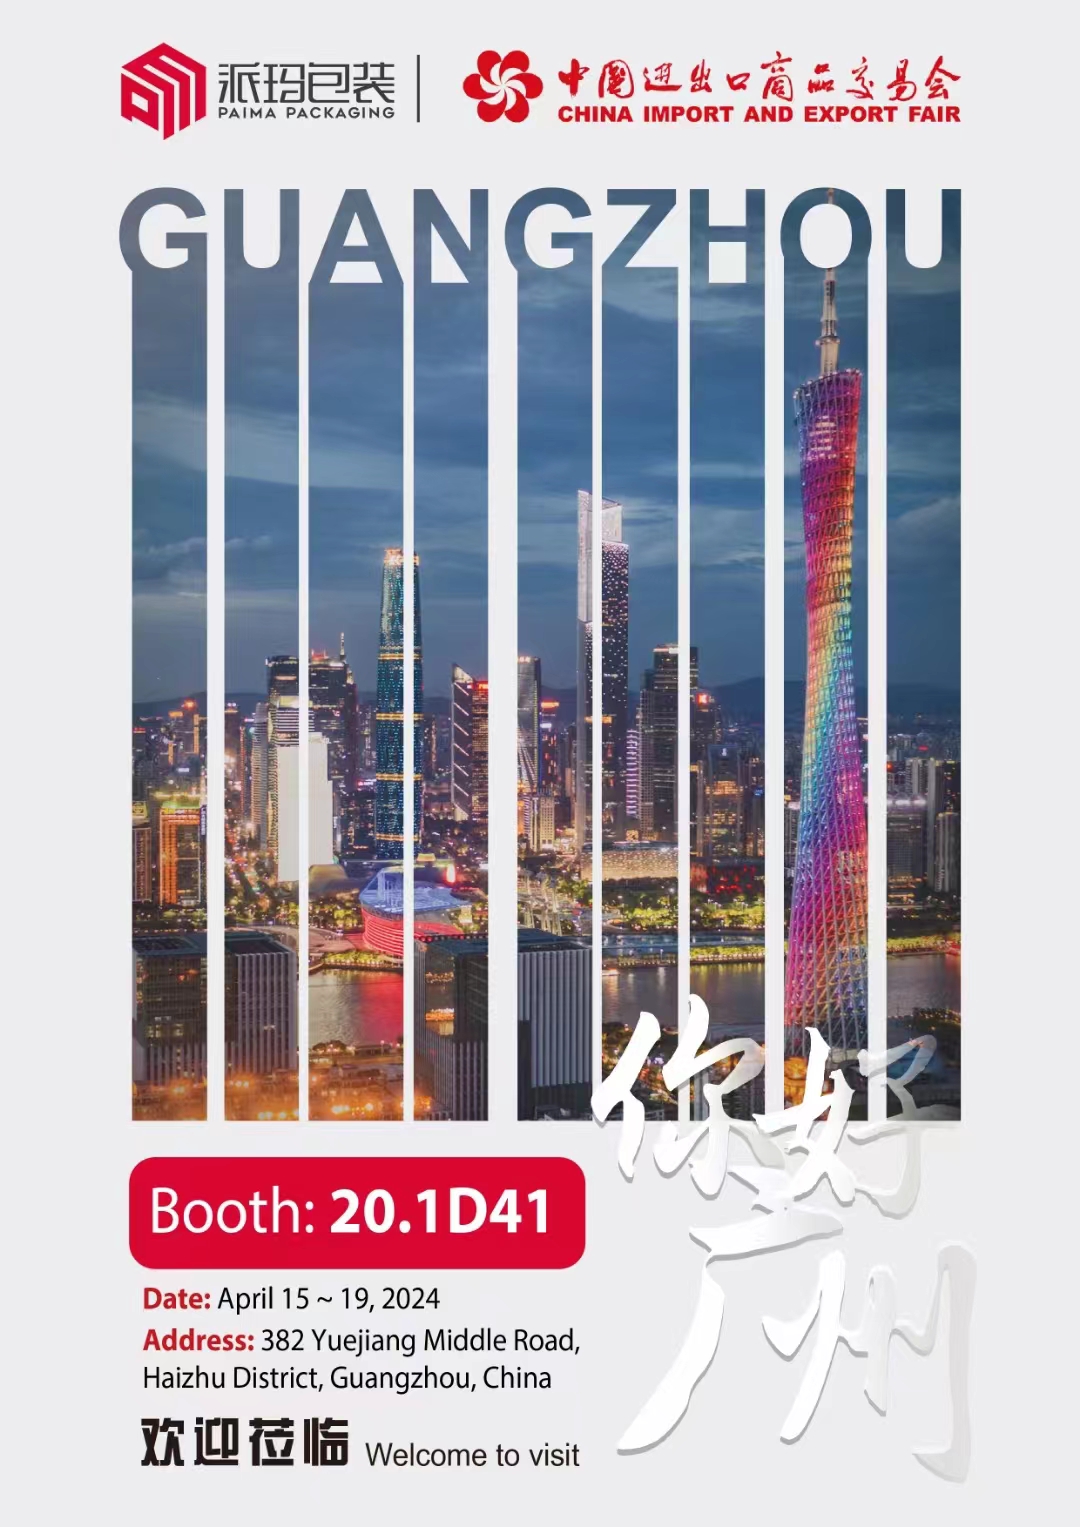  Invitation to Visit Us at the 2024 China Import and Export Fair in April